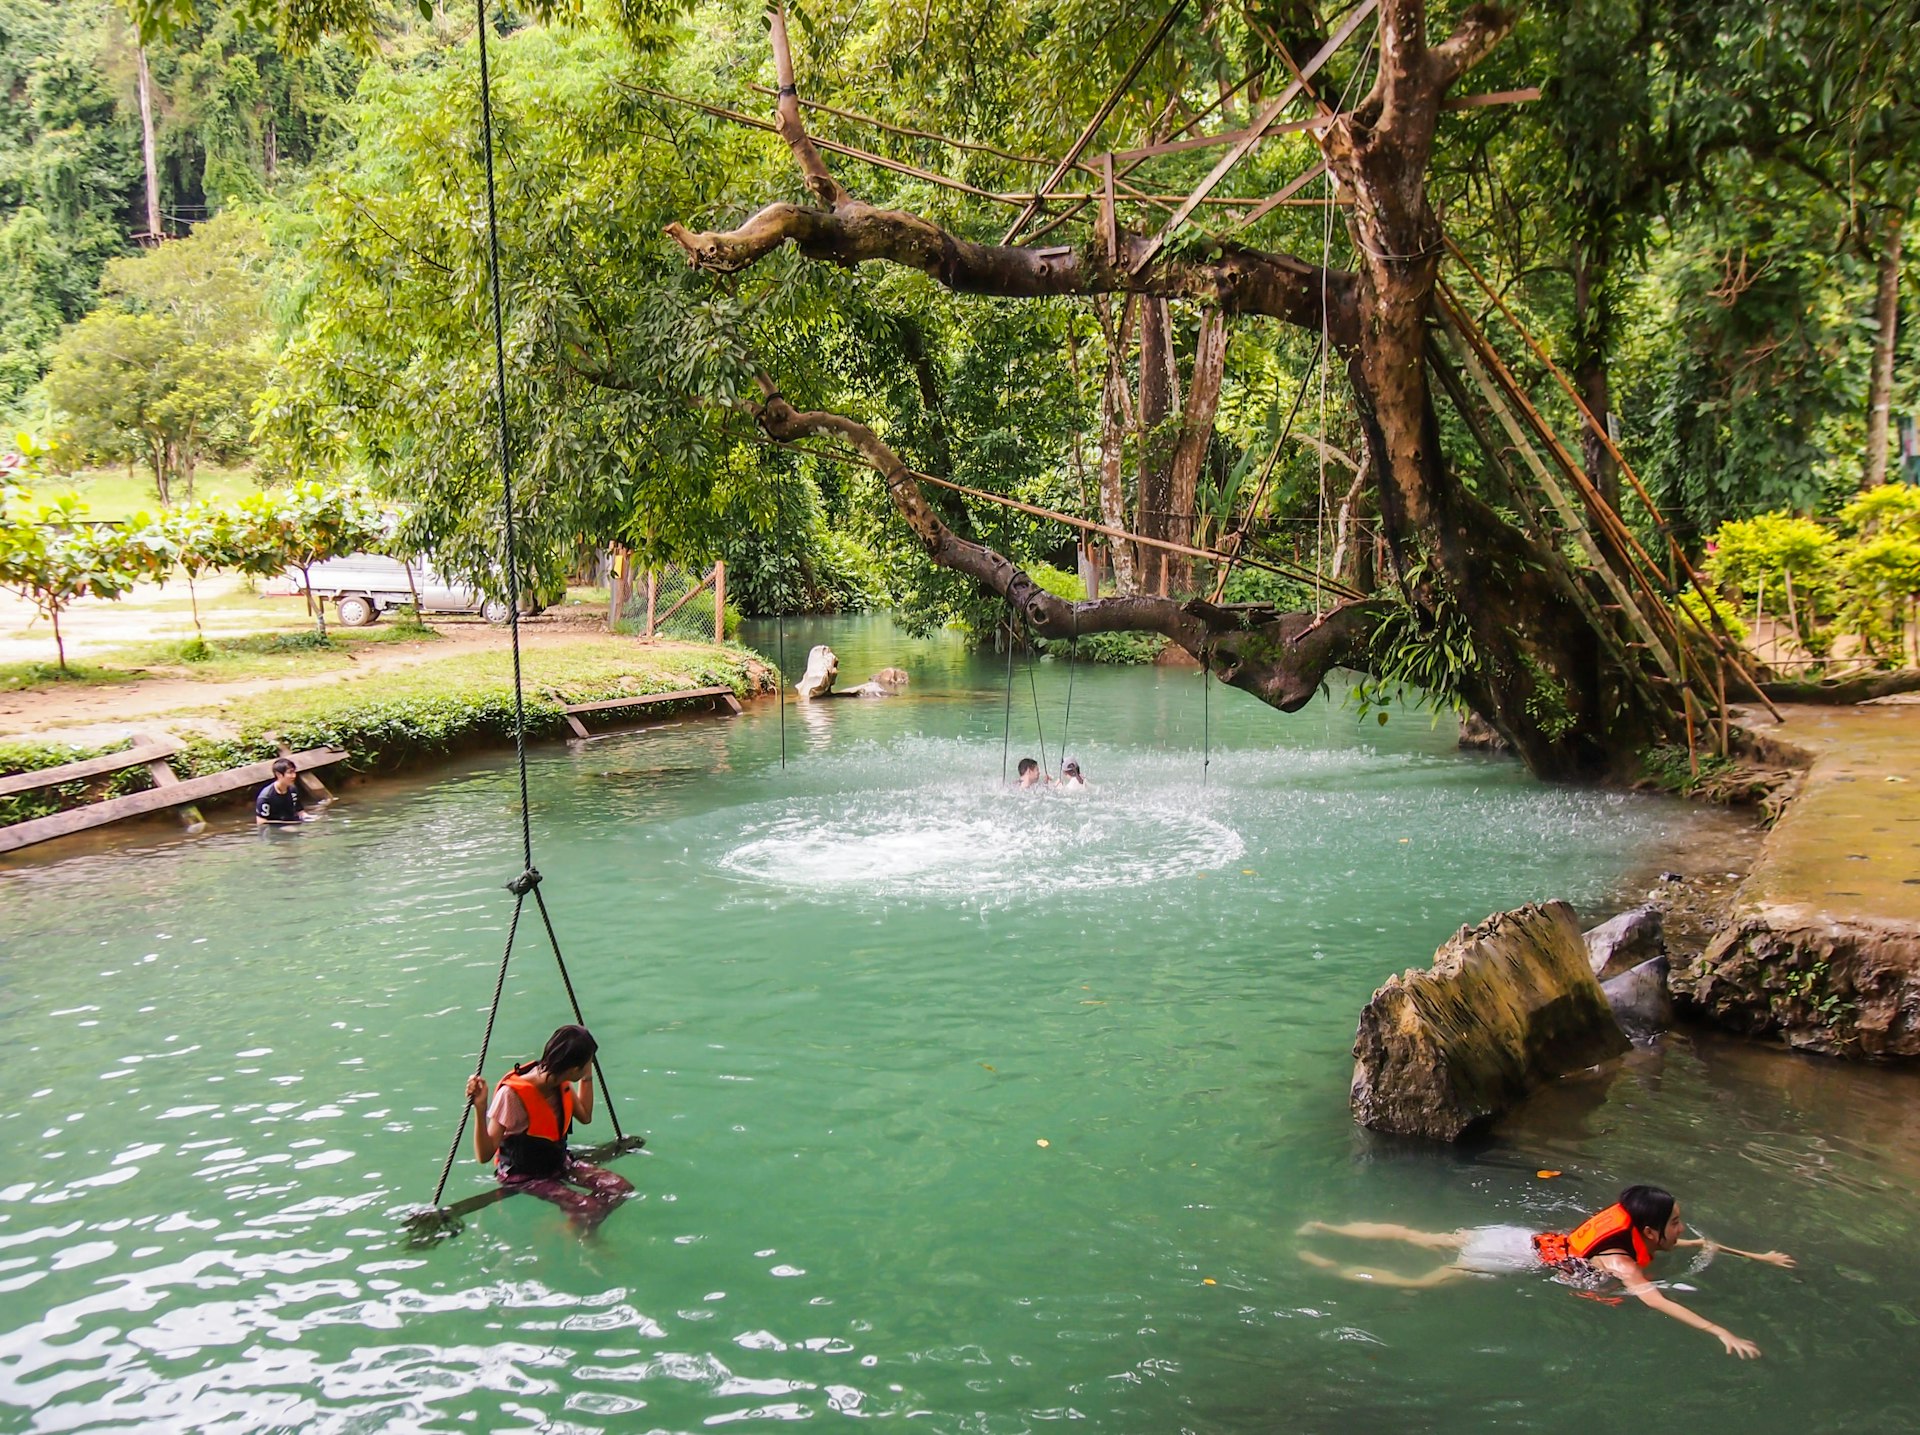 Unidentified tourist swimming at blue lagoon in Vang Vieng